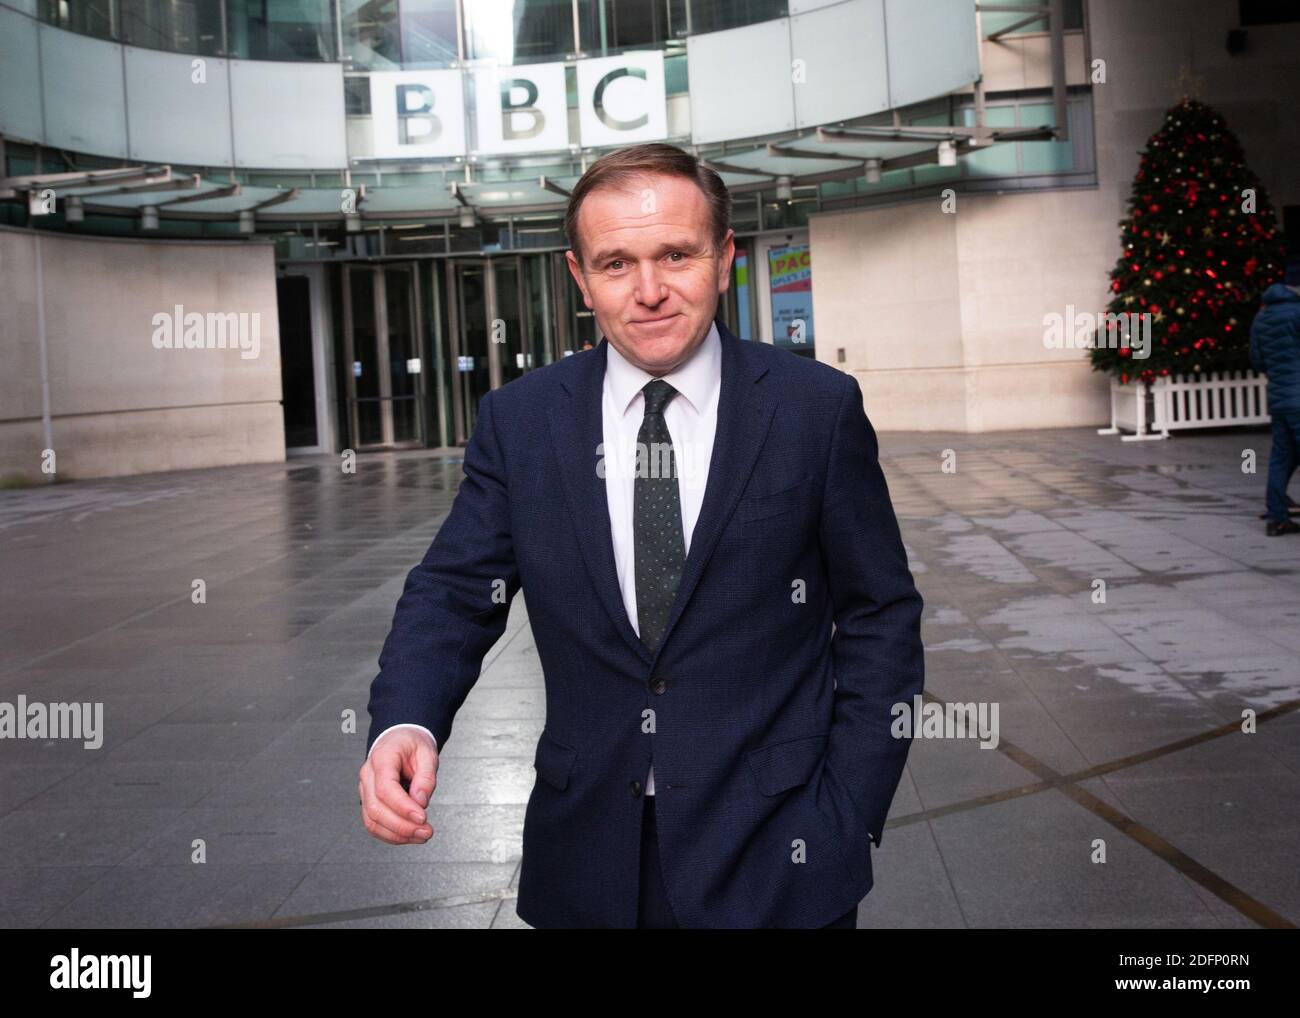 London, UK. 8th Dec, 2020. George Eustice, Secretary of State for Environment, Food and Rural Affairs, at the BBC Studios in Central London. Credit: Mark Thomas/Alamy Live News Stock Photo